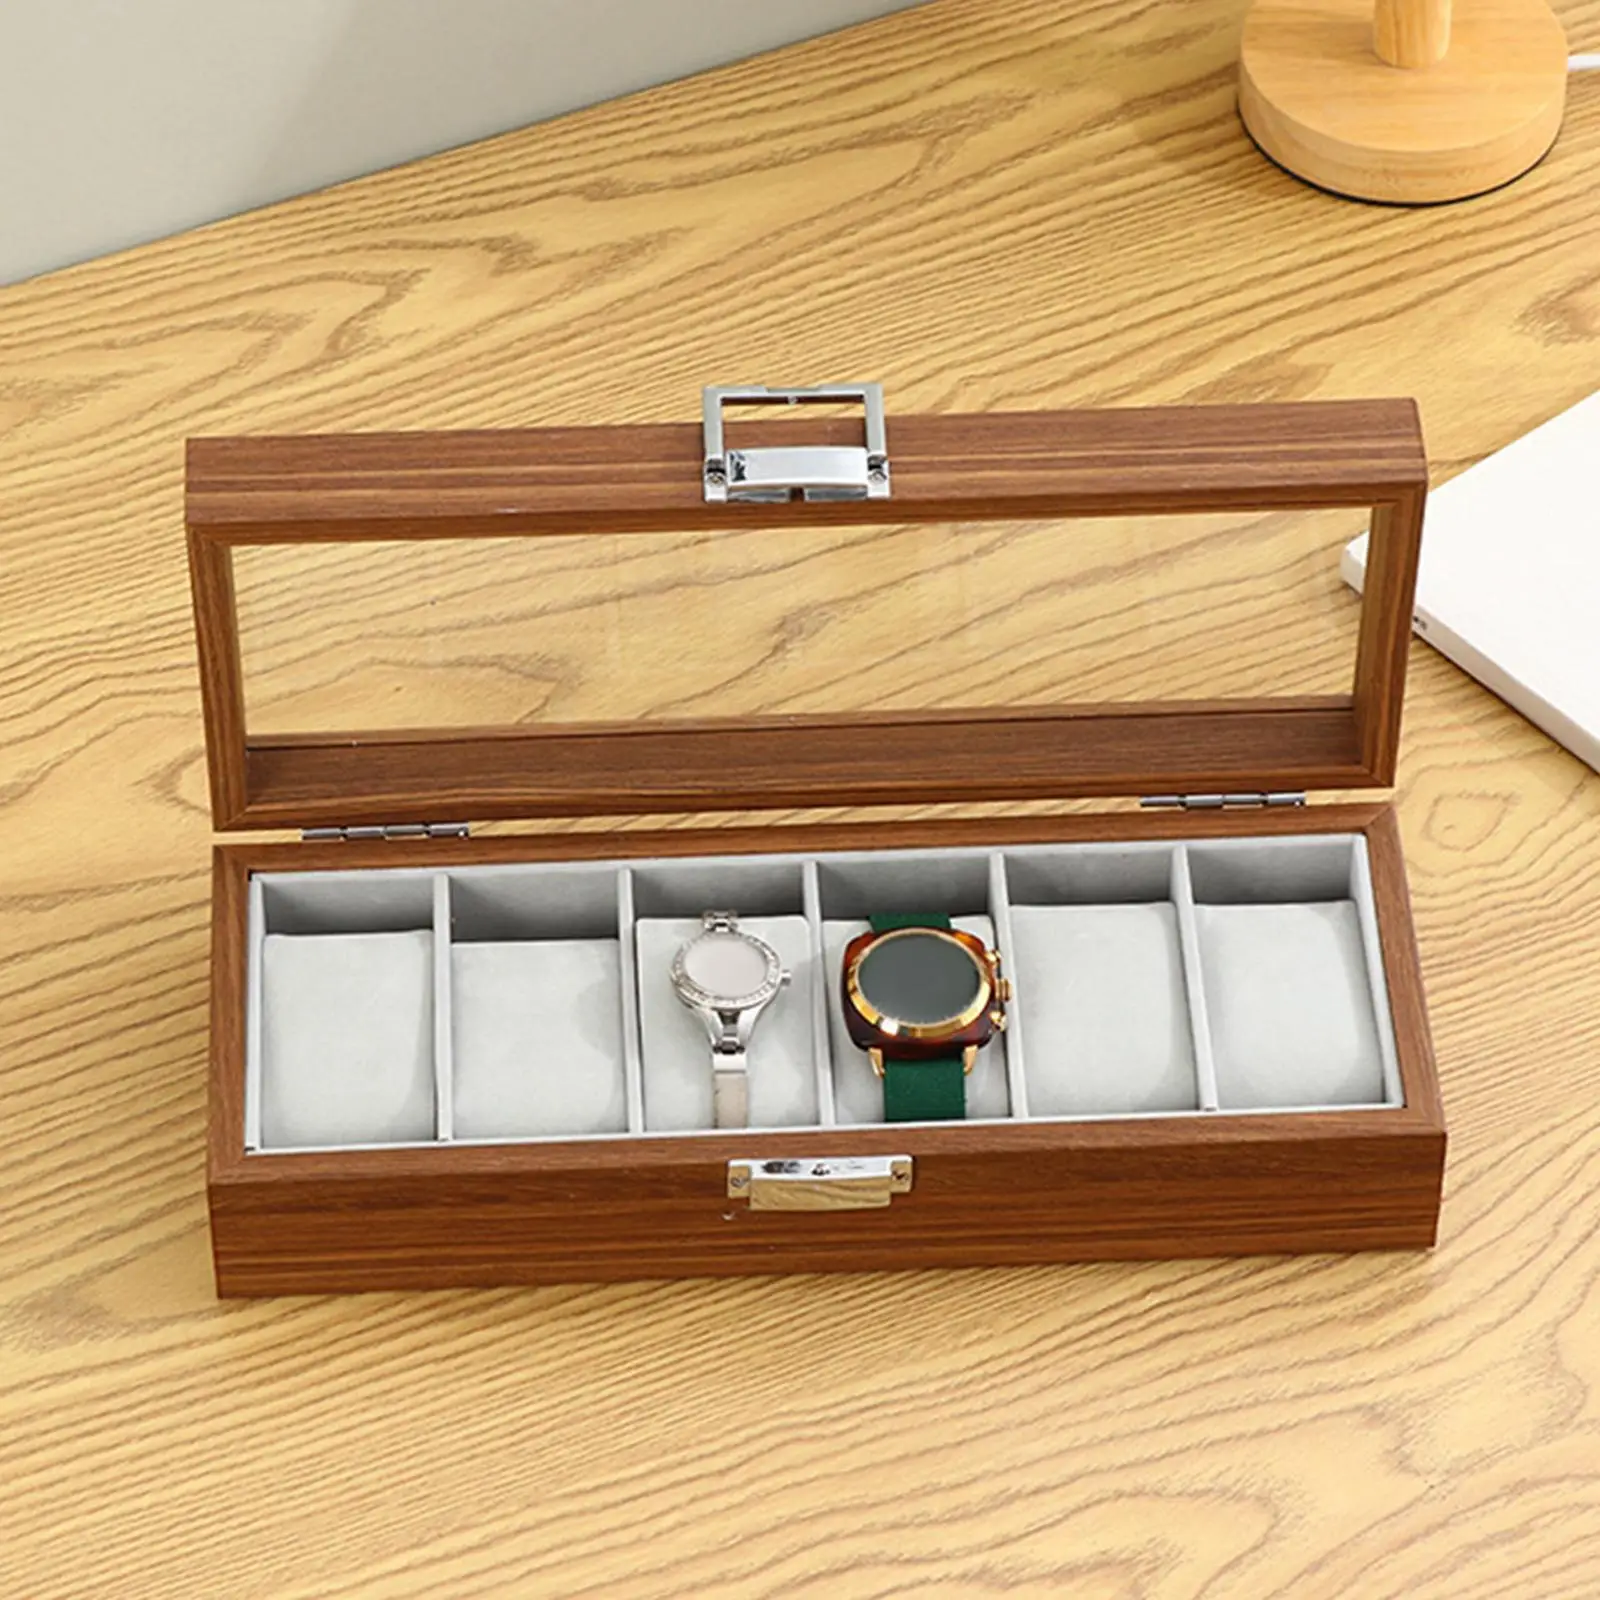 Watch Storage Box 6 Slot Jewelry Display Case for Girls Women Watches Jewelry Display Table Dresser Shop Display Home Decoration